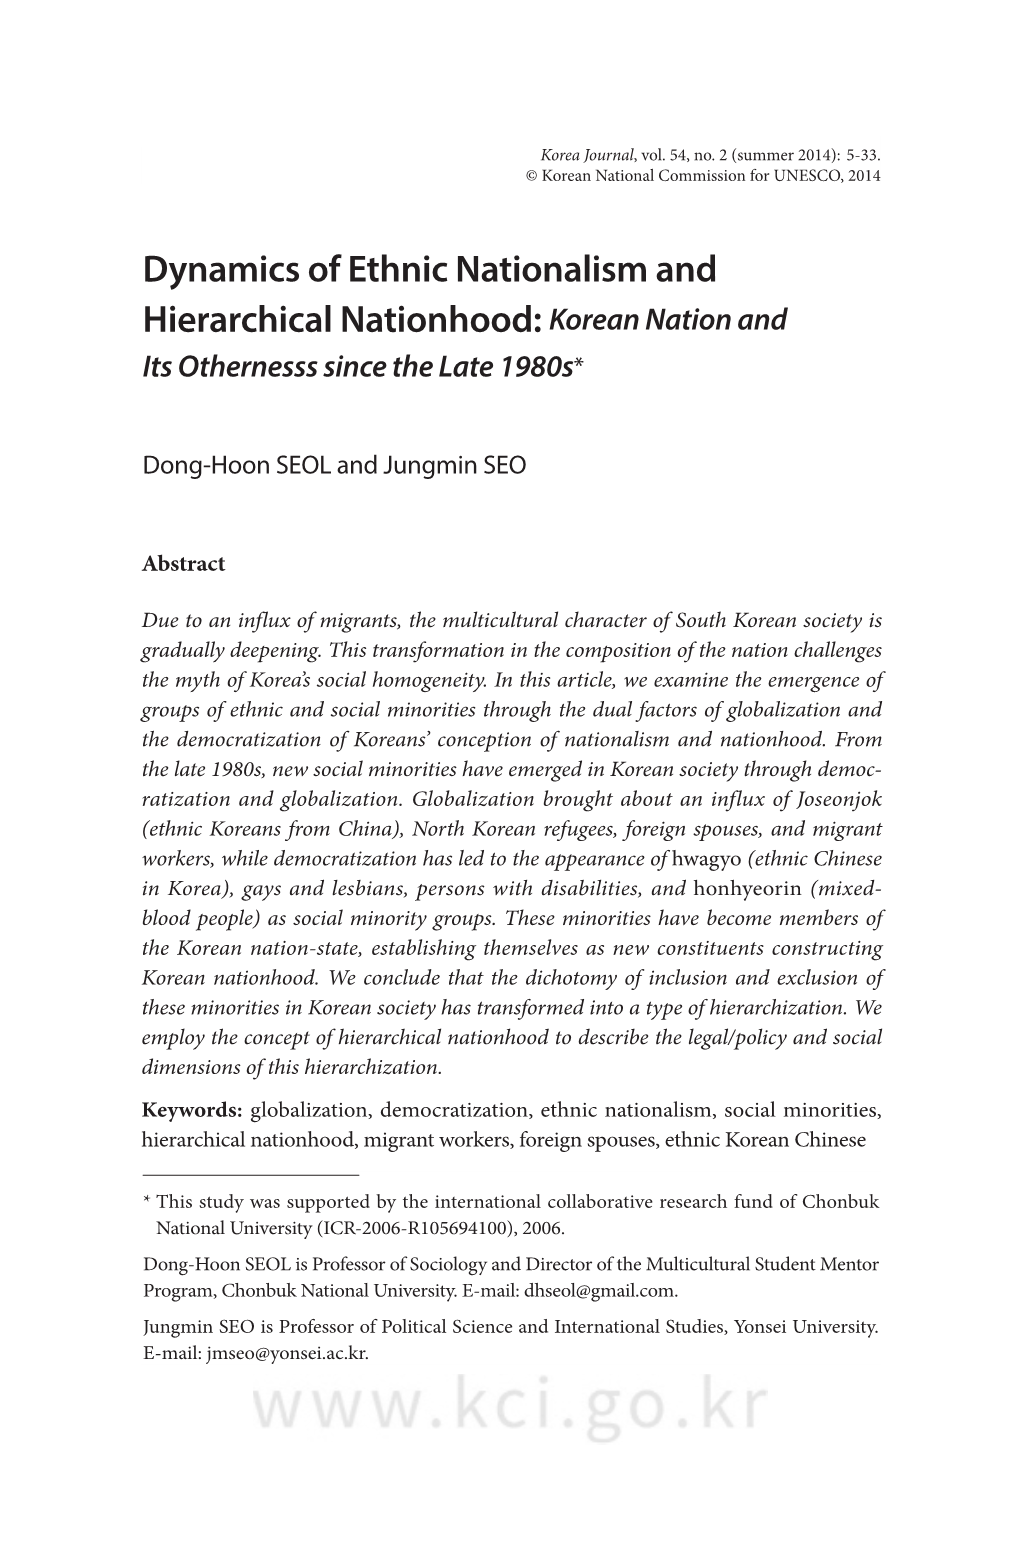 Dynamics of Ethnic Nationalism and Hierarchical Nationhood: Korean Nation and Its Othernesss Since the Late 1980S*